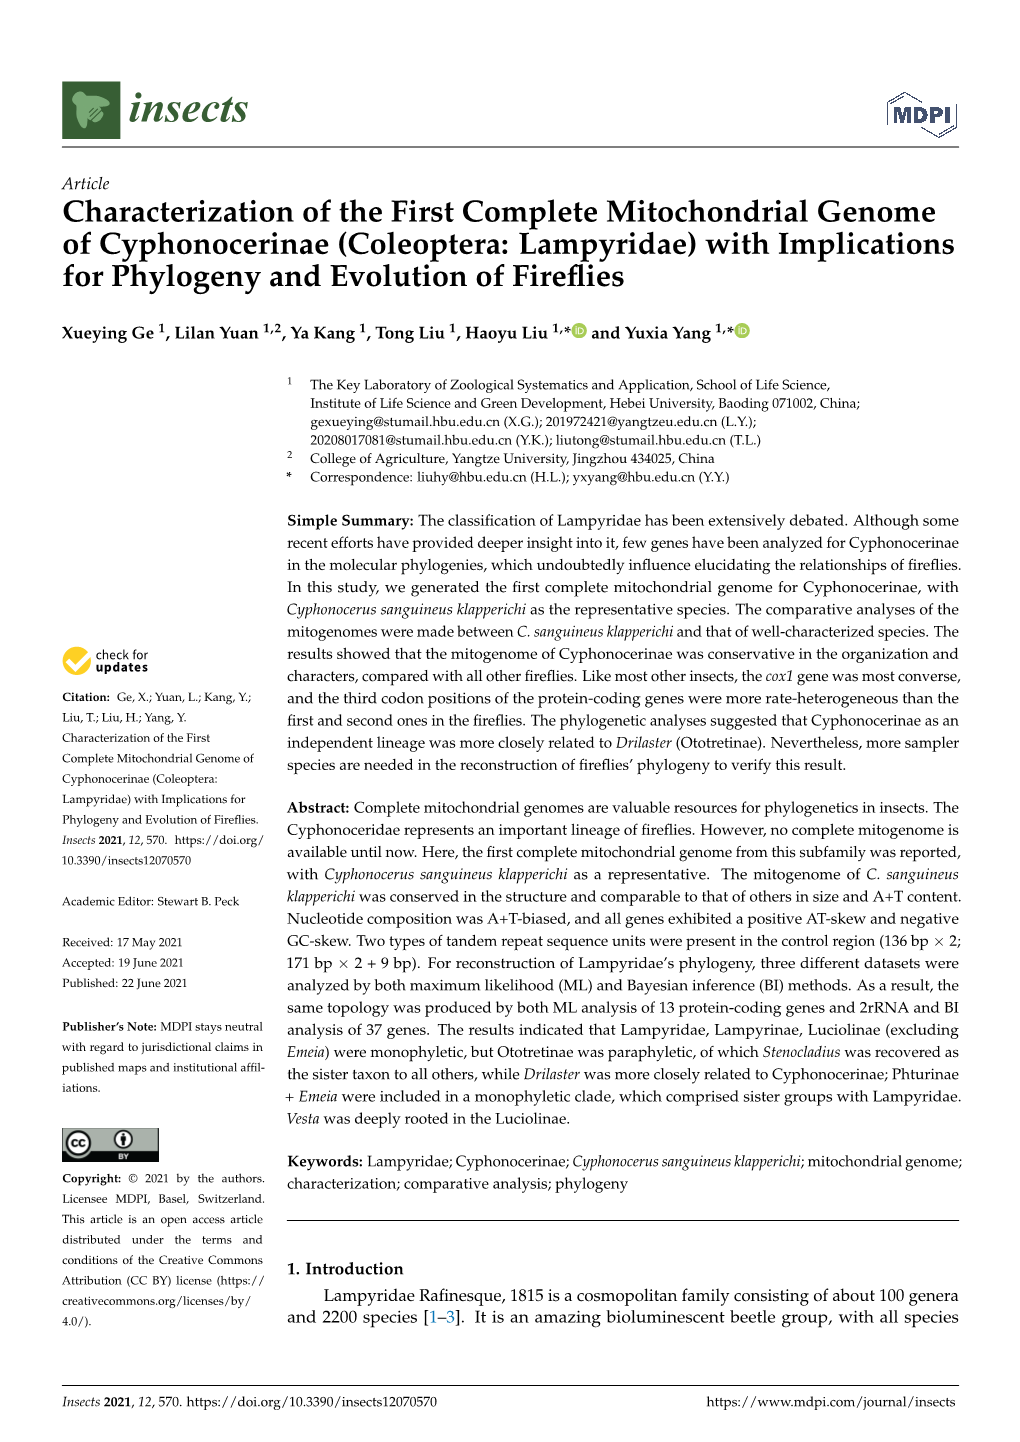 Characterization of the First Complete Mitochondrial Genome of Cyphonocerinae (Coleoptera: Lampyridae) with Implications for Phylogeny and Evolution of Fireﬂies